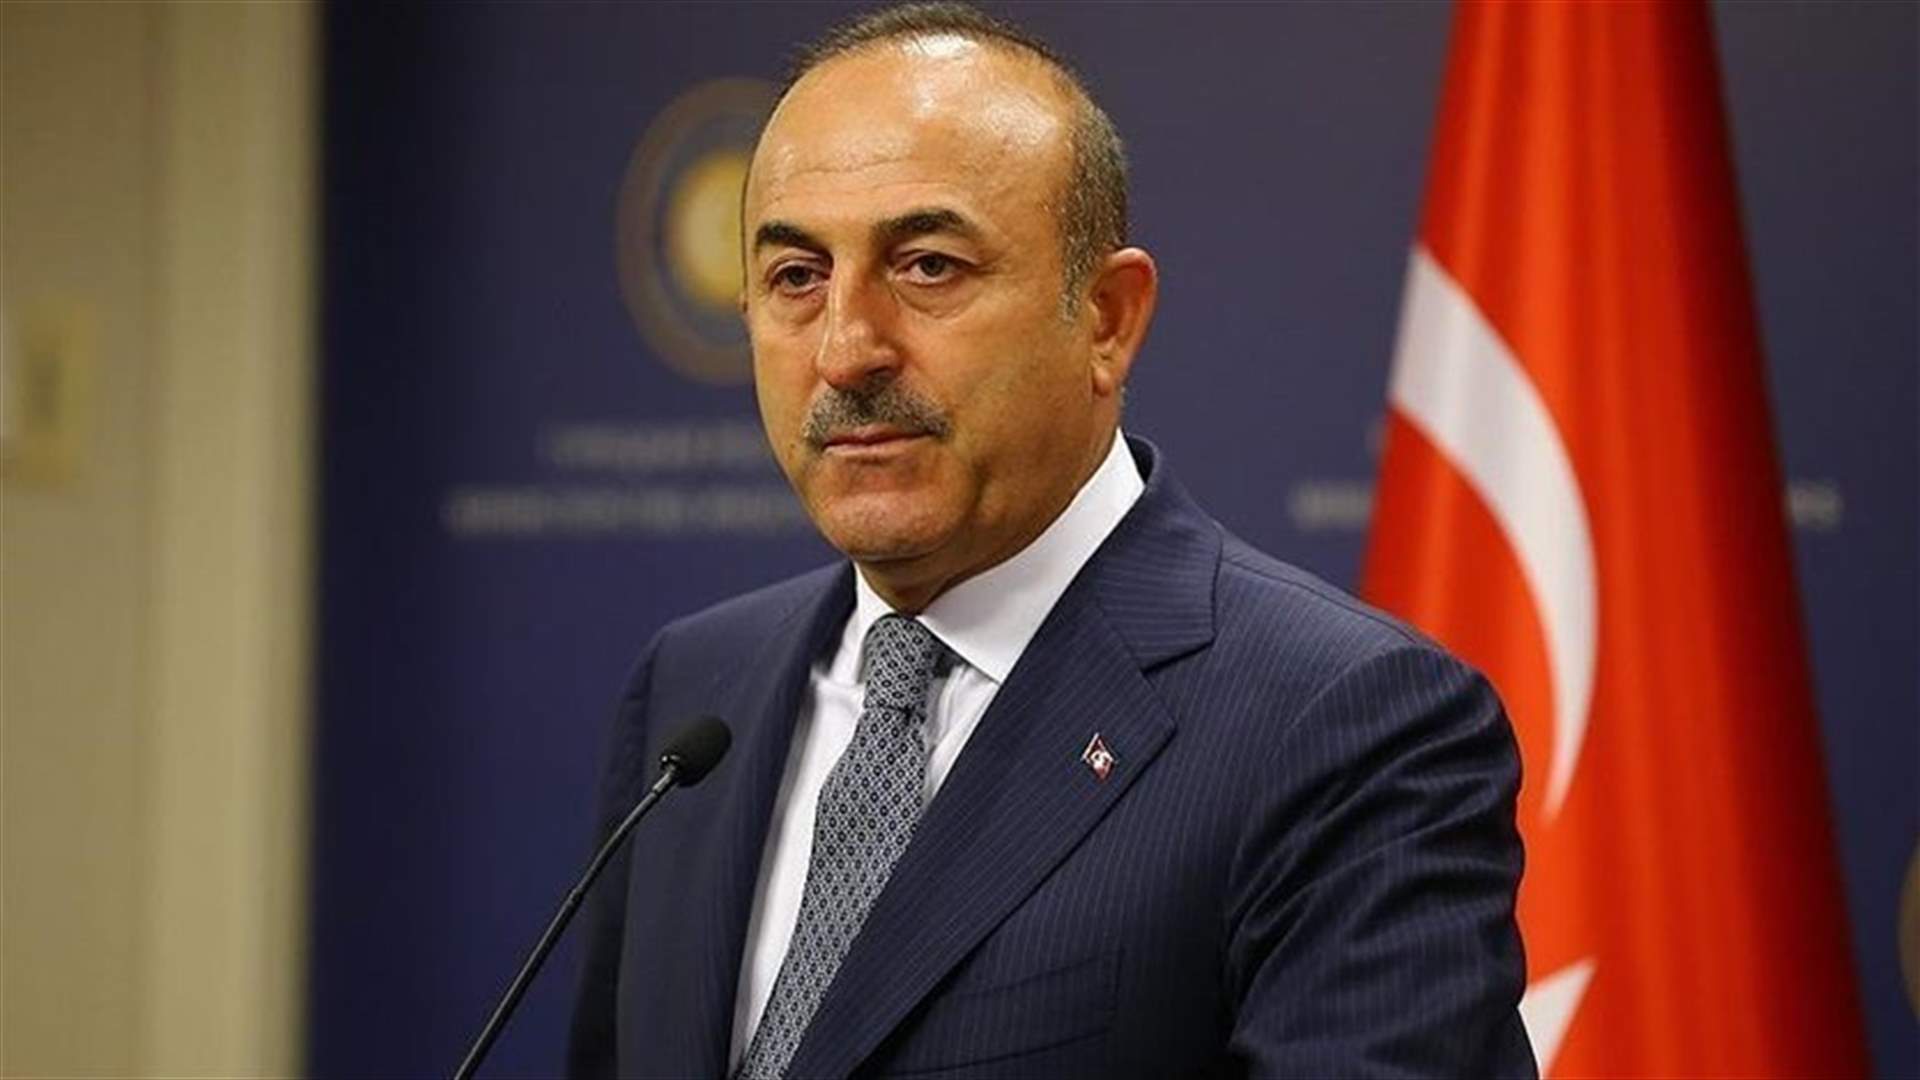 Turkey says it will retaliate against US sanctions over Syria offensive